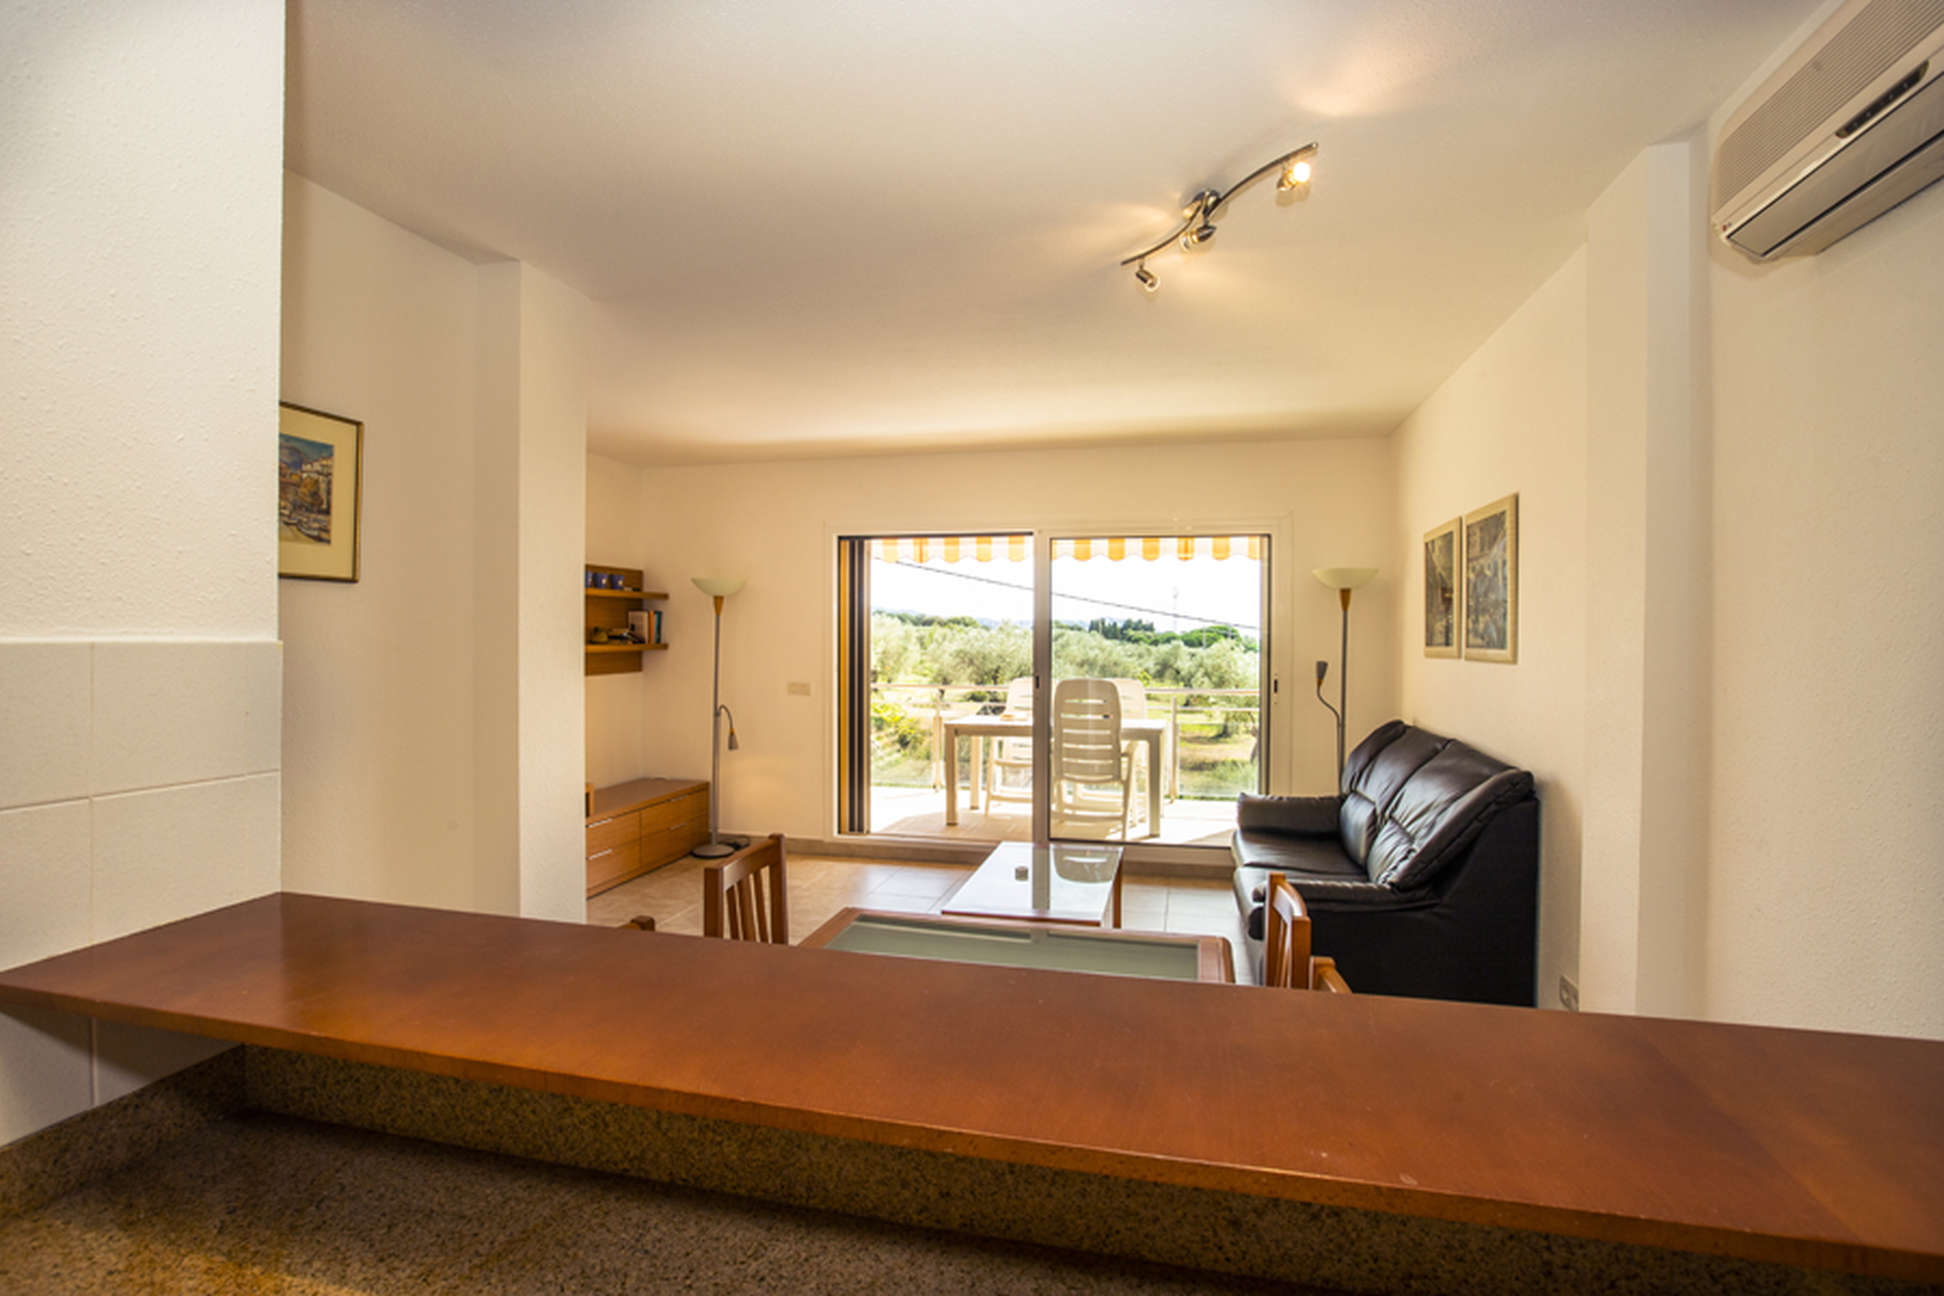 Beautiful, bright corner apartment with fantastic views over the bay of Roses.